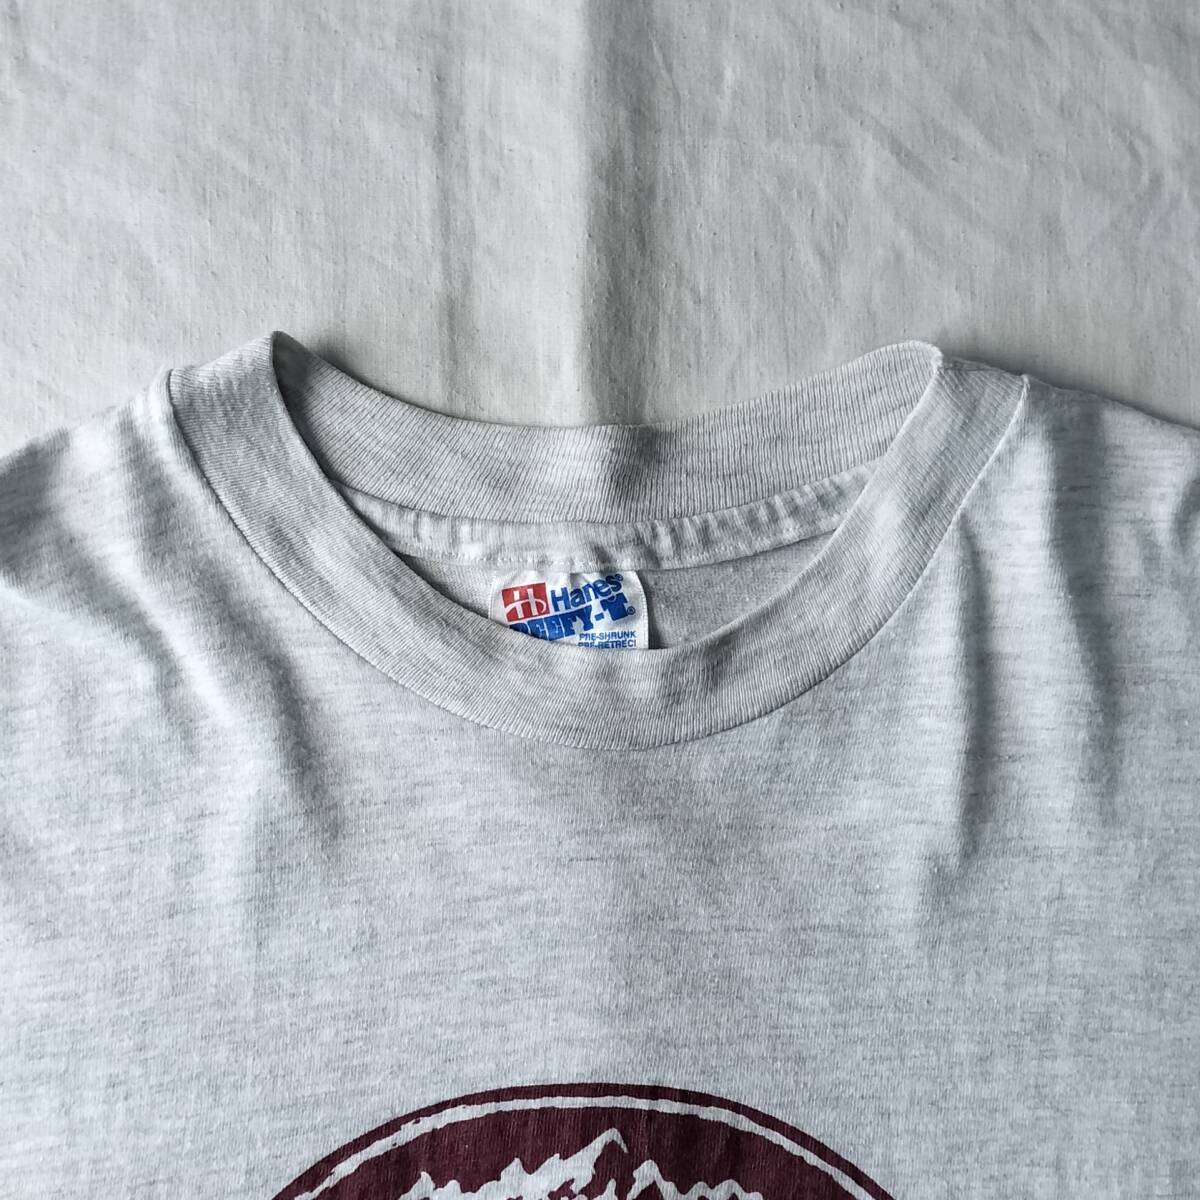 1990's MADE IN USA アメリカ製 Hanes プリントTシャツ ヴィンテージ グレー 表記Lサイズ 希少の画像3